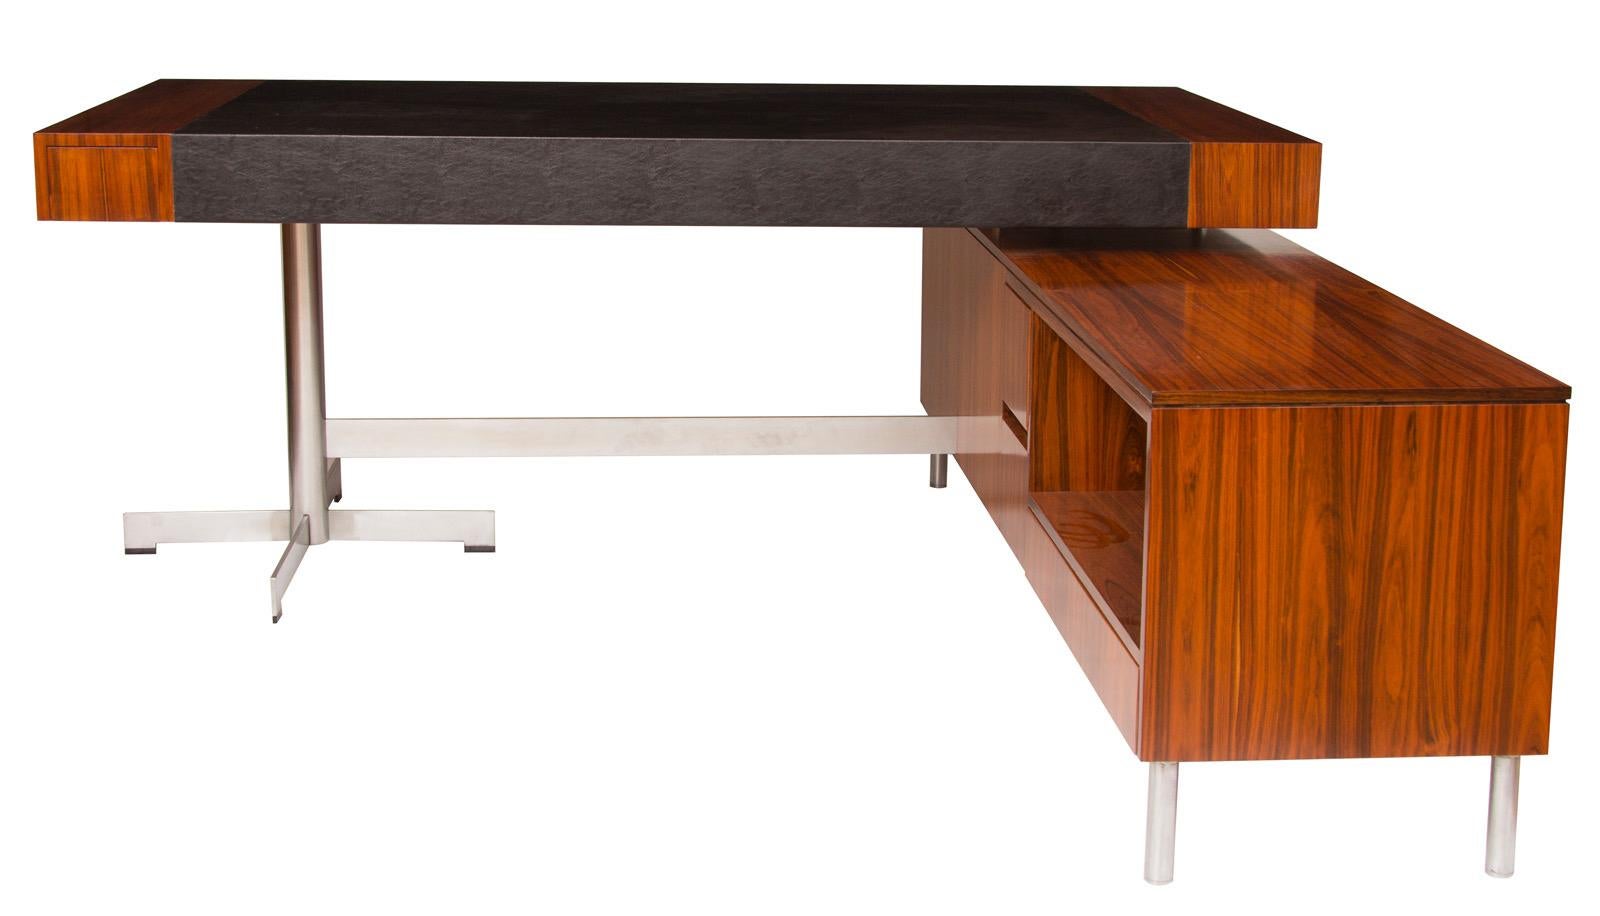 Midcentury rosewood desk.
Large midcentury rosewood and chrome desk L shape desk unit with large leather writing area, in the Manner of Merrow Associates.
I am attributing this to Merrow Associates because of the flat chrome legs which have the